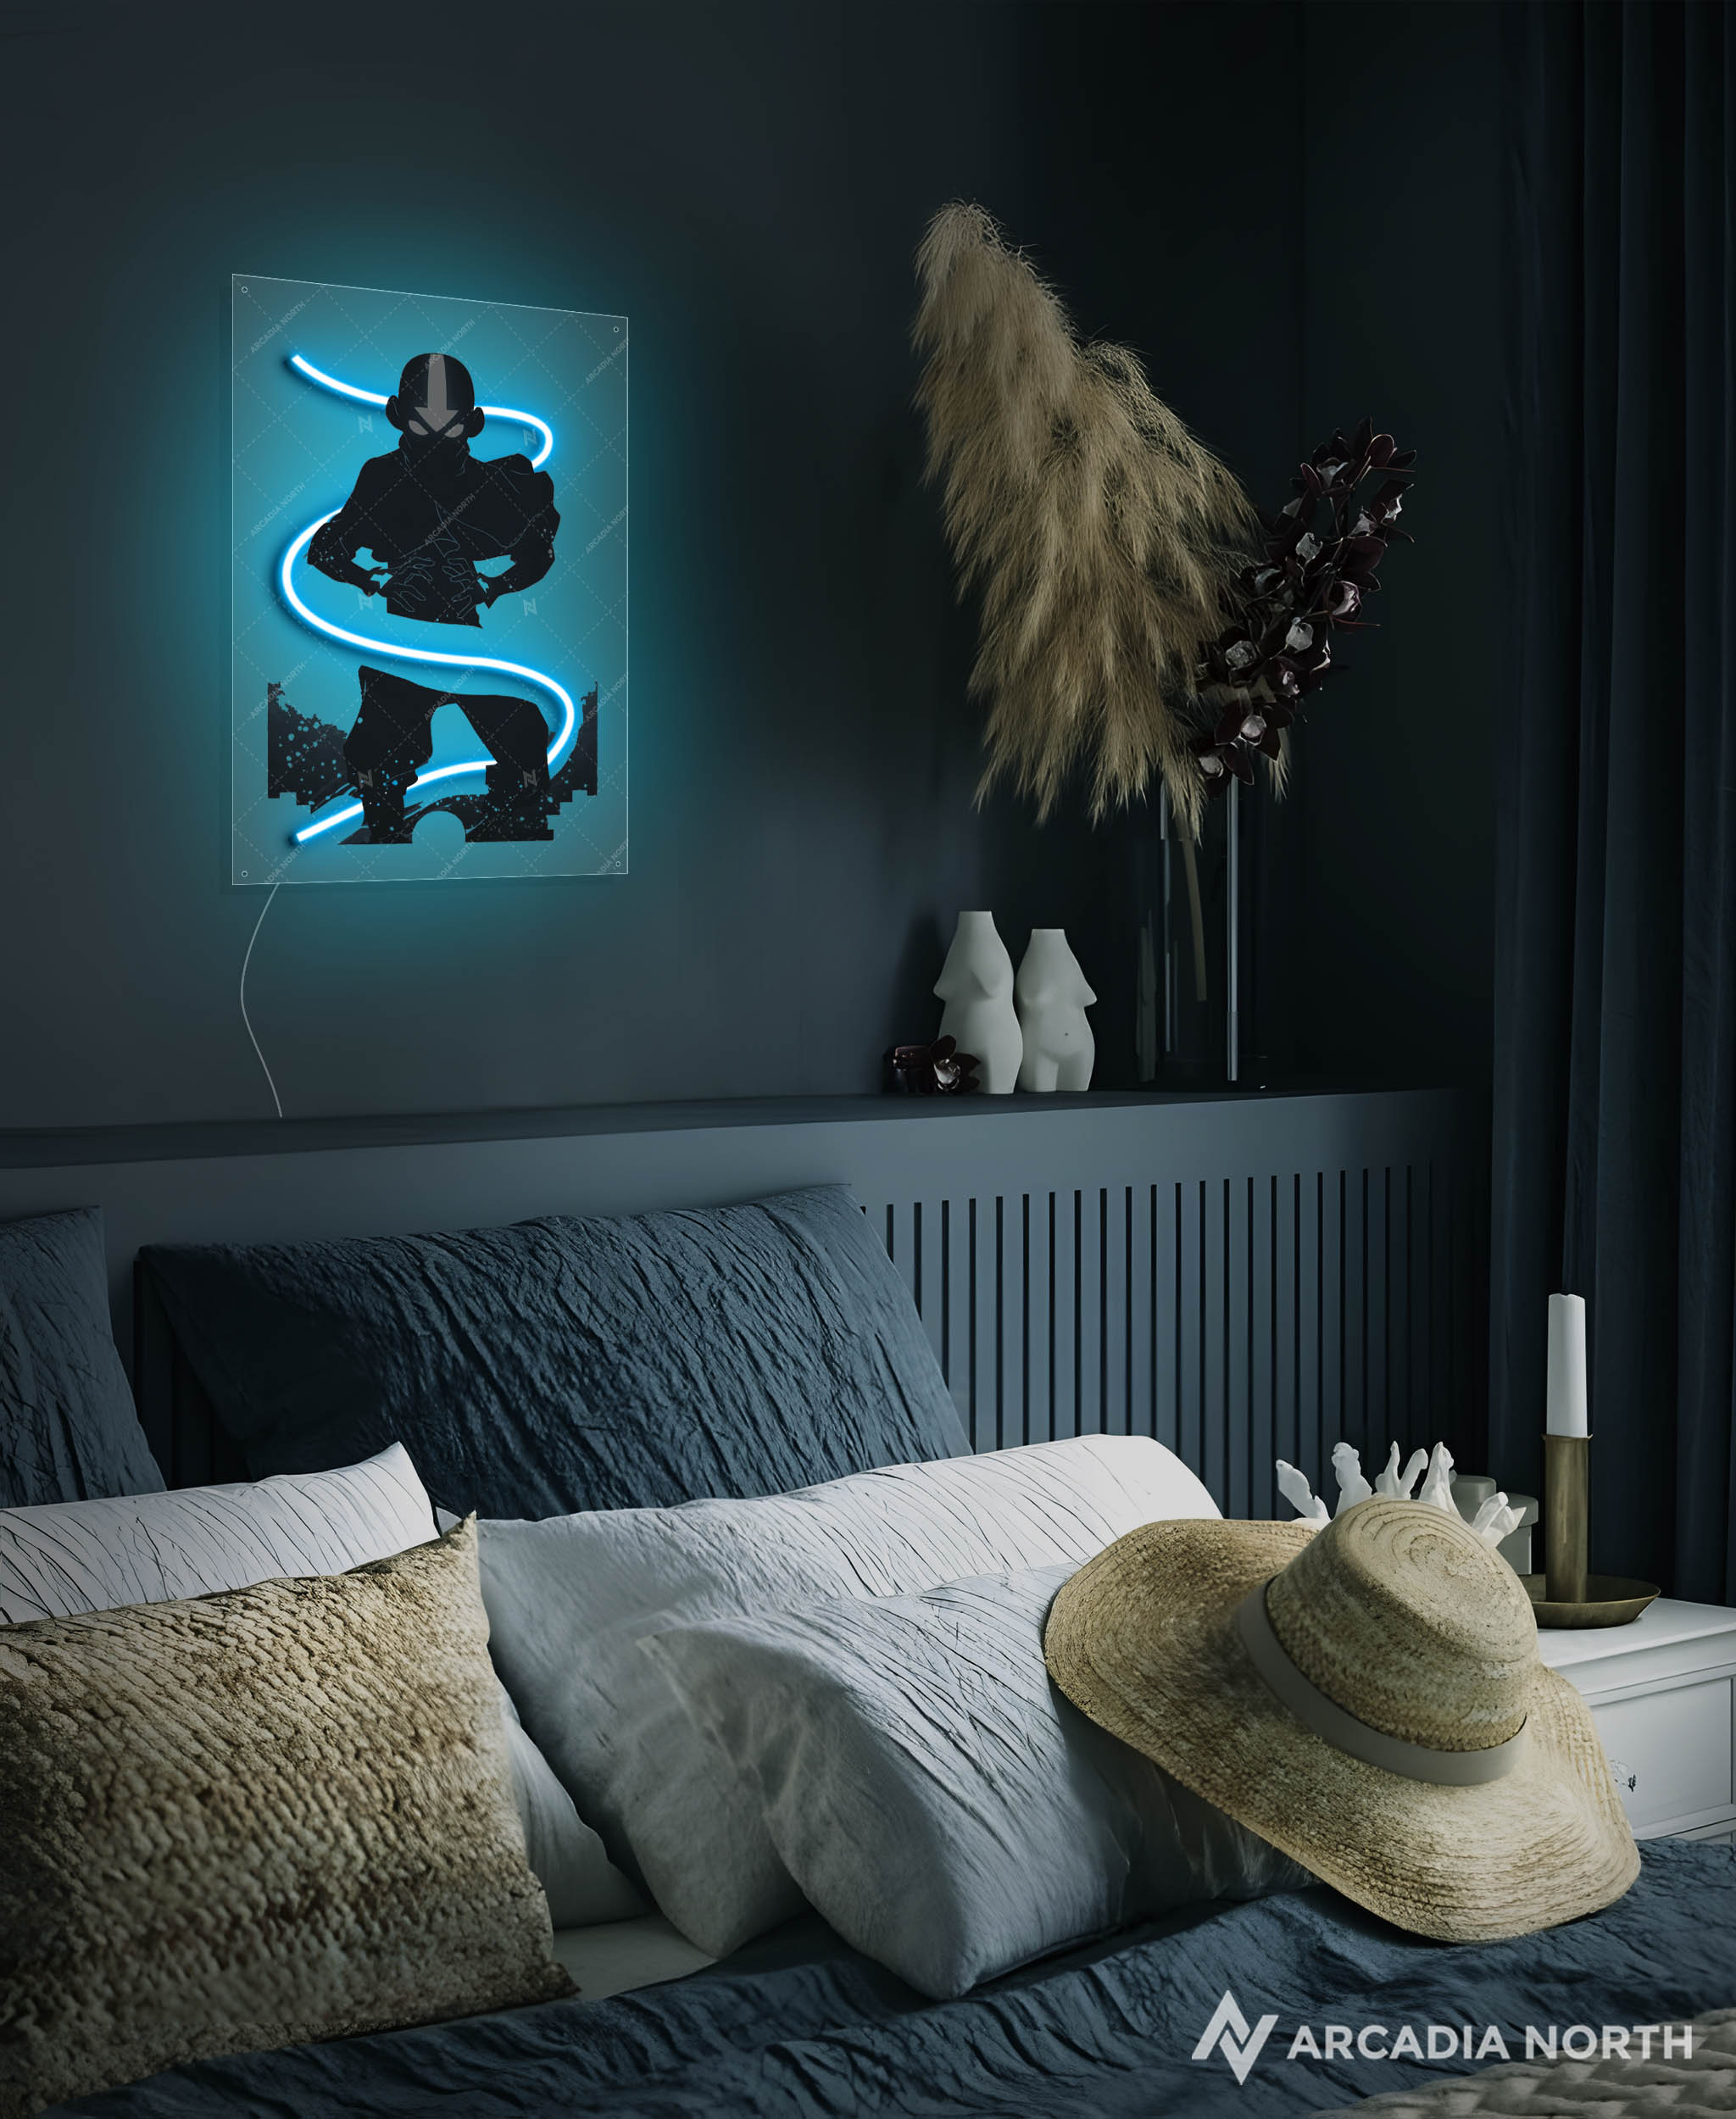 Arcadia North AURALIGHT - an LED Poster featuring the anime Avatar The Last Airbender with Aang airbending illuminated by glowing LED neon lights. UV-printed poster on acrylic.